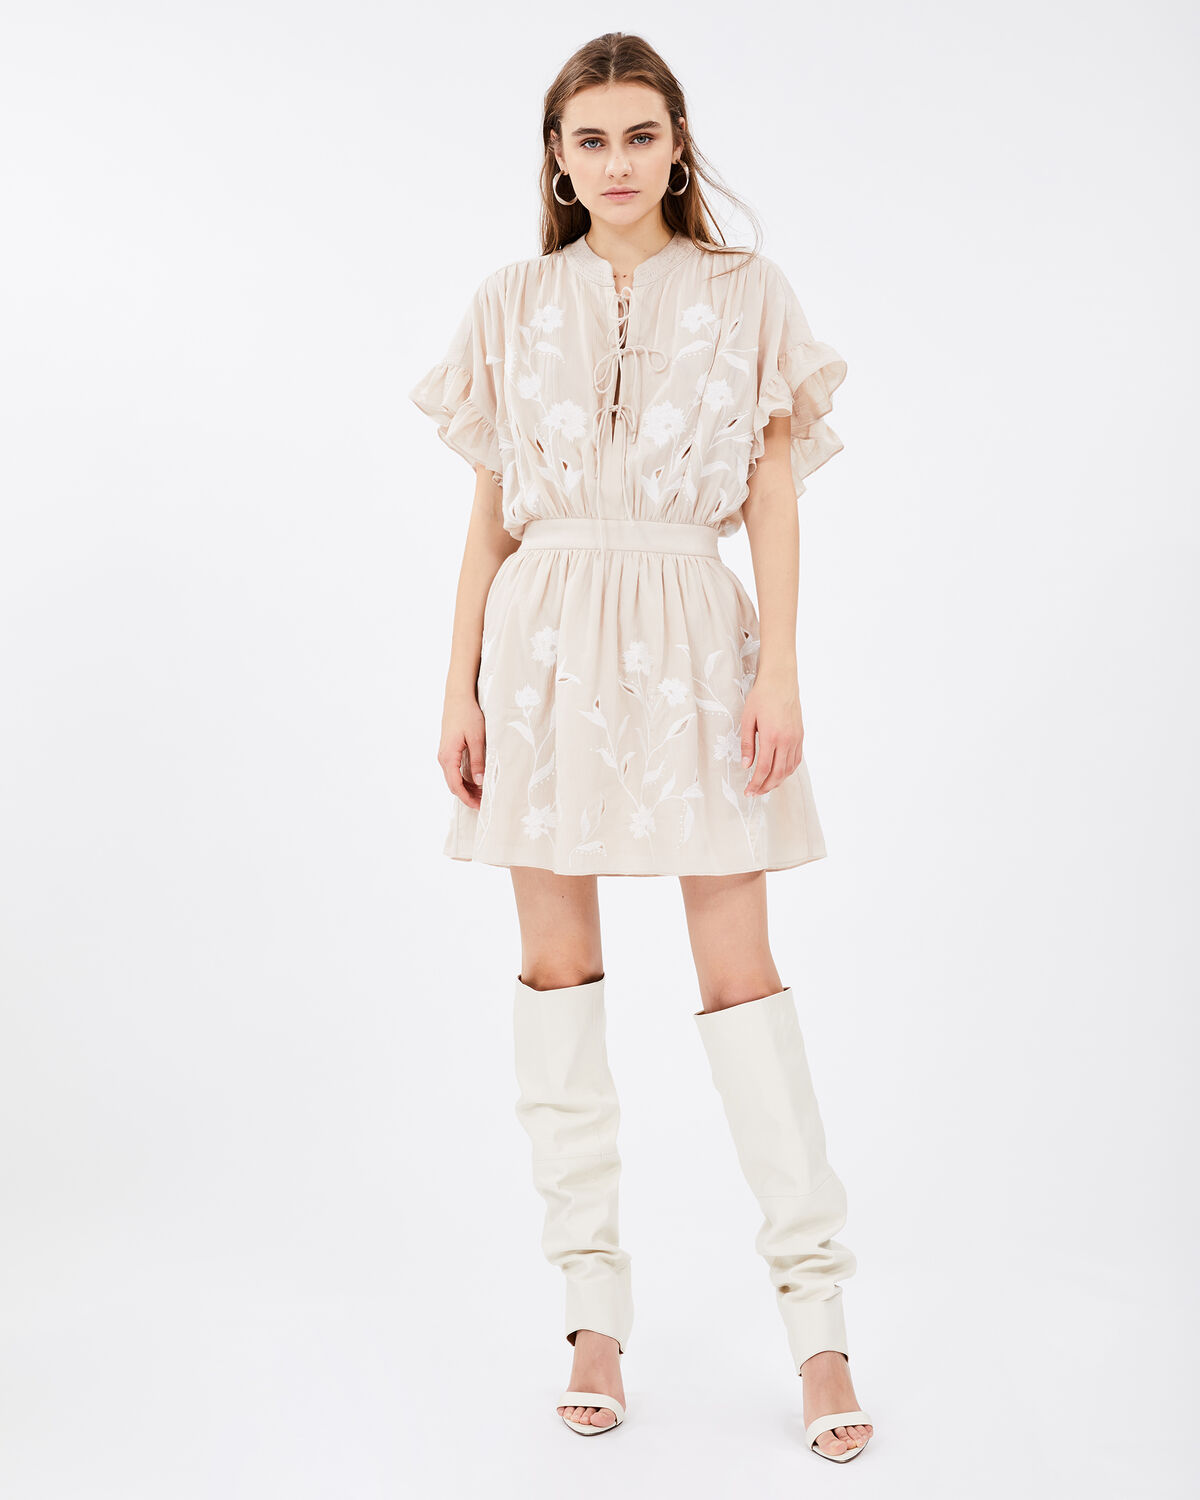 Photo of IRO Paris Kauri Dress Nude - This Dress Is Distinguished By Its Lacing And Embroidery. With Its Oversized Cut And Elastic Waist, It Will Bring A Bohemian Touch To Your Outfits. Wear It With A Pair Of White Boots For A Resolutely Modern Look. Dresses